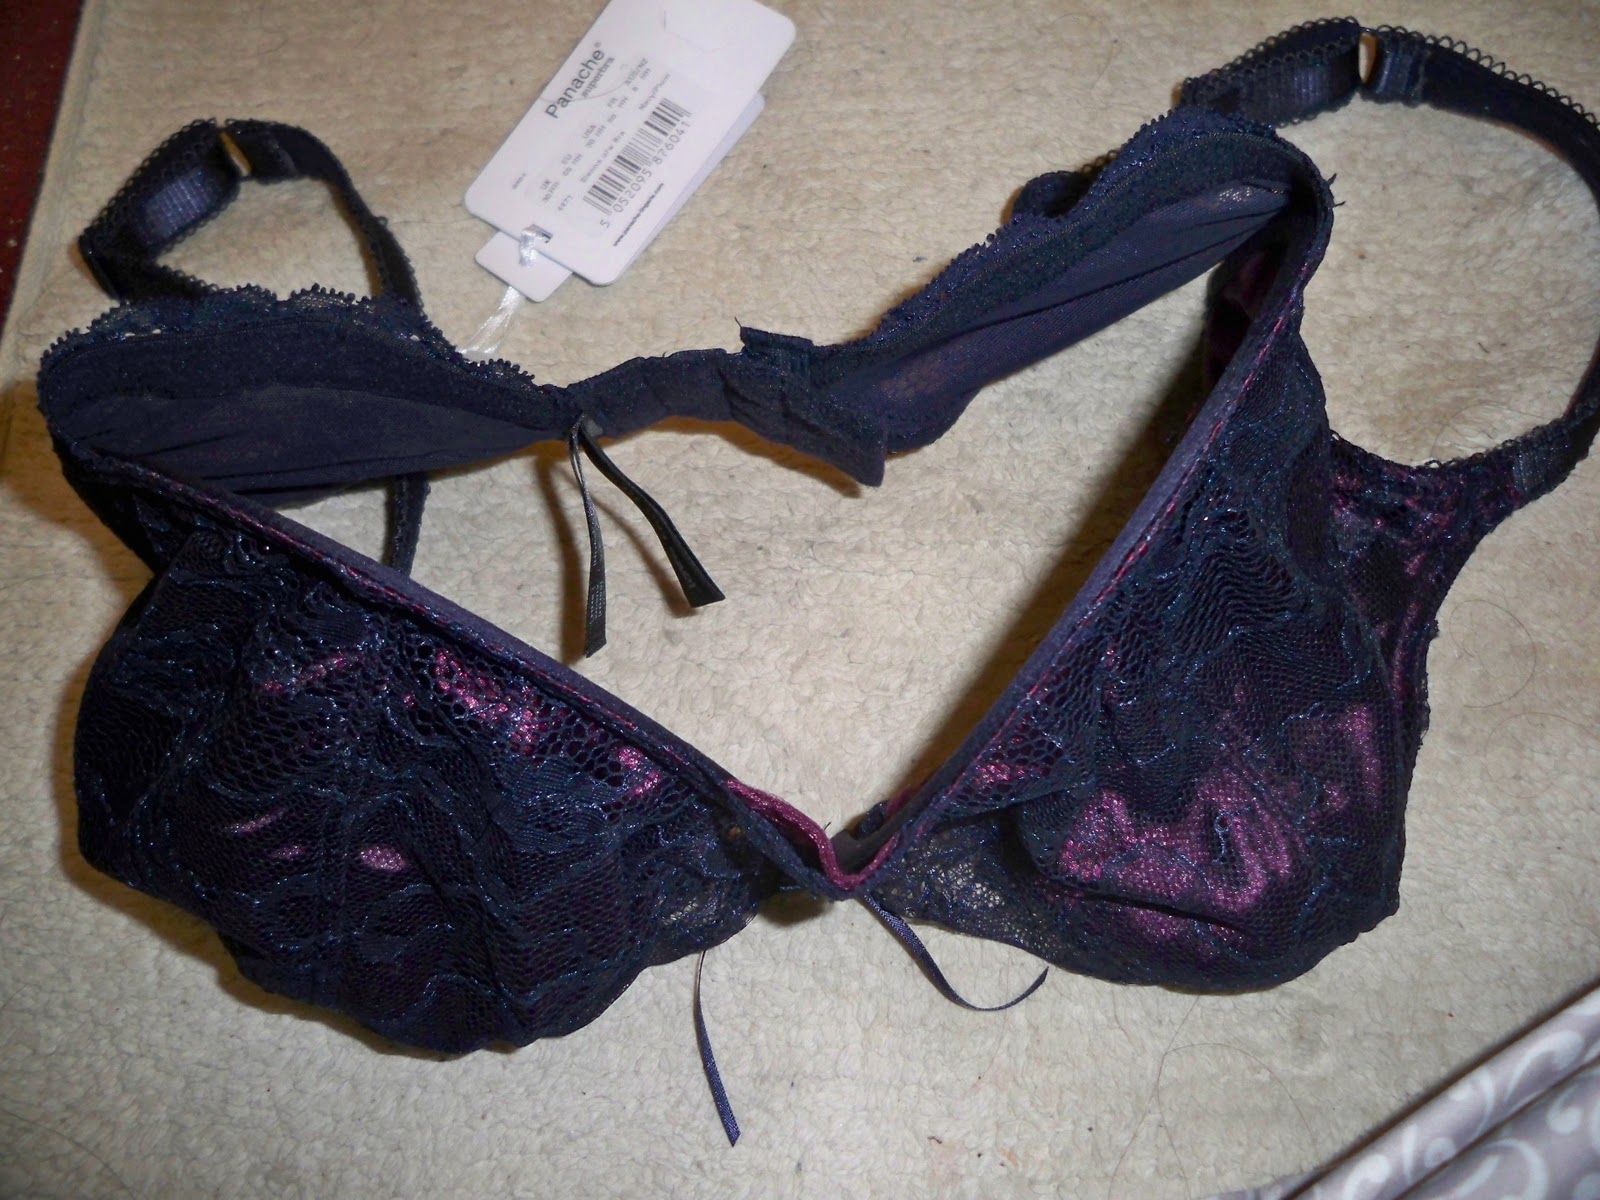 Bras I Hate & Love: What To Do With Those Pesky Wide Underwires